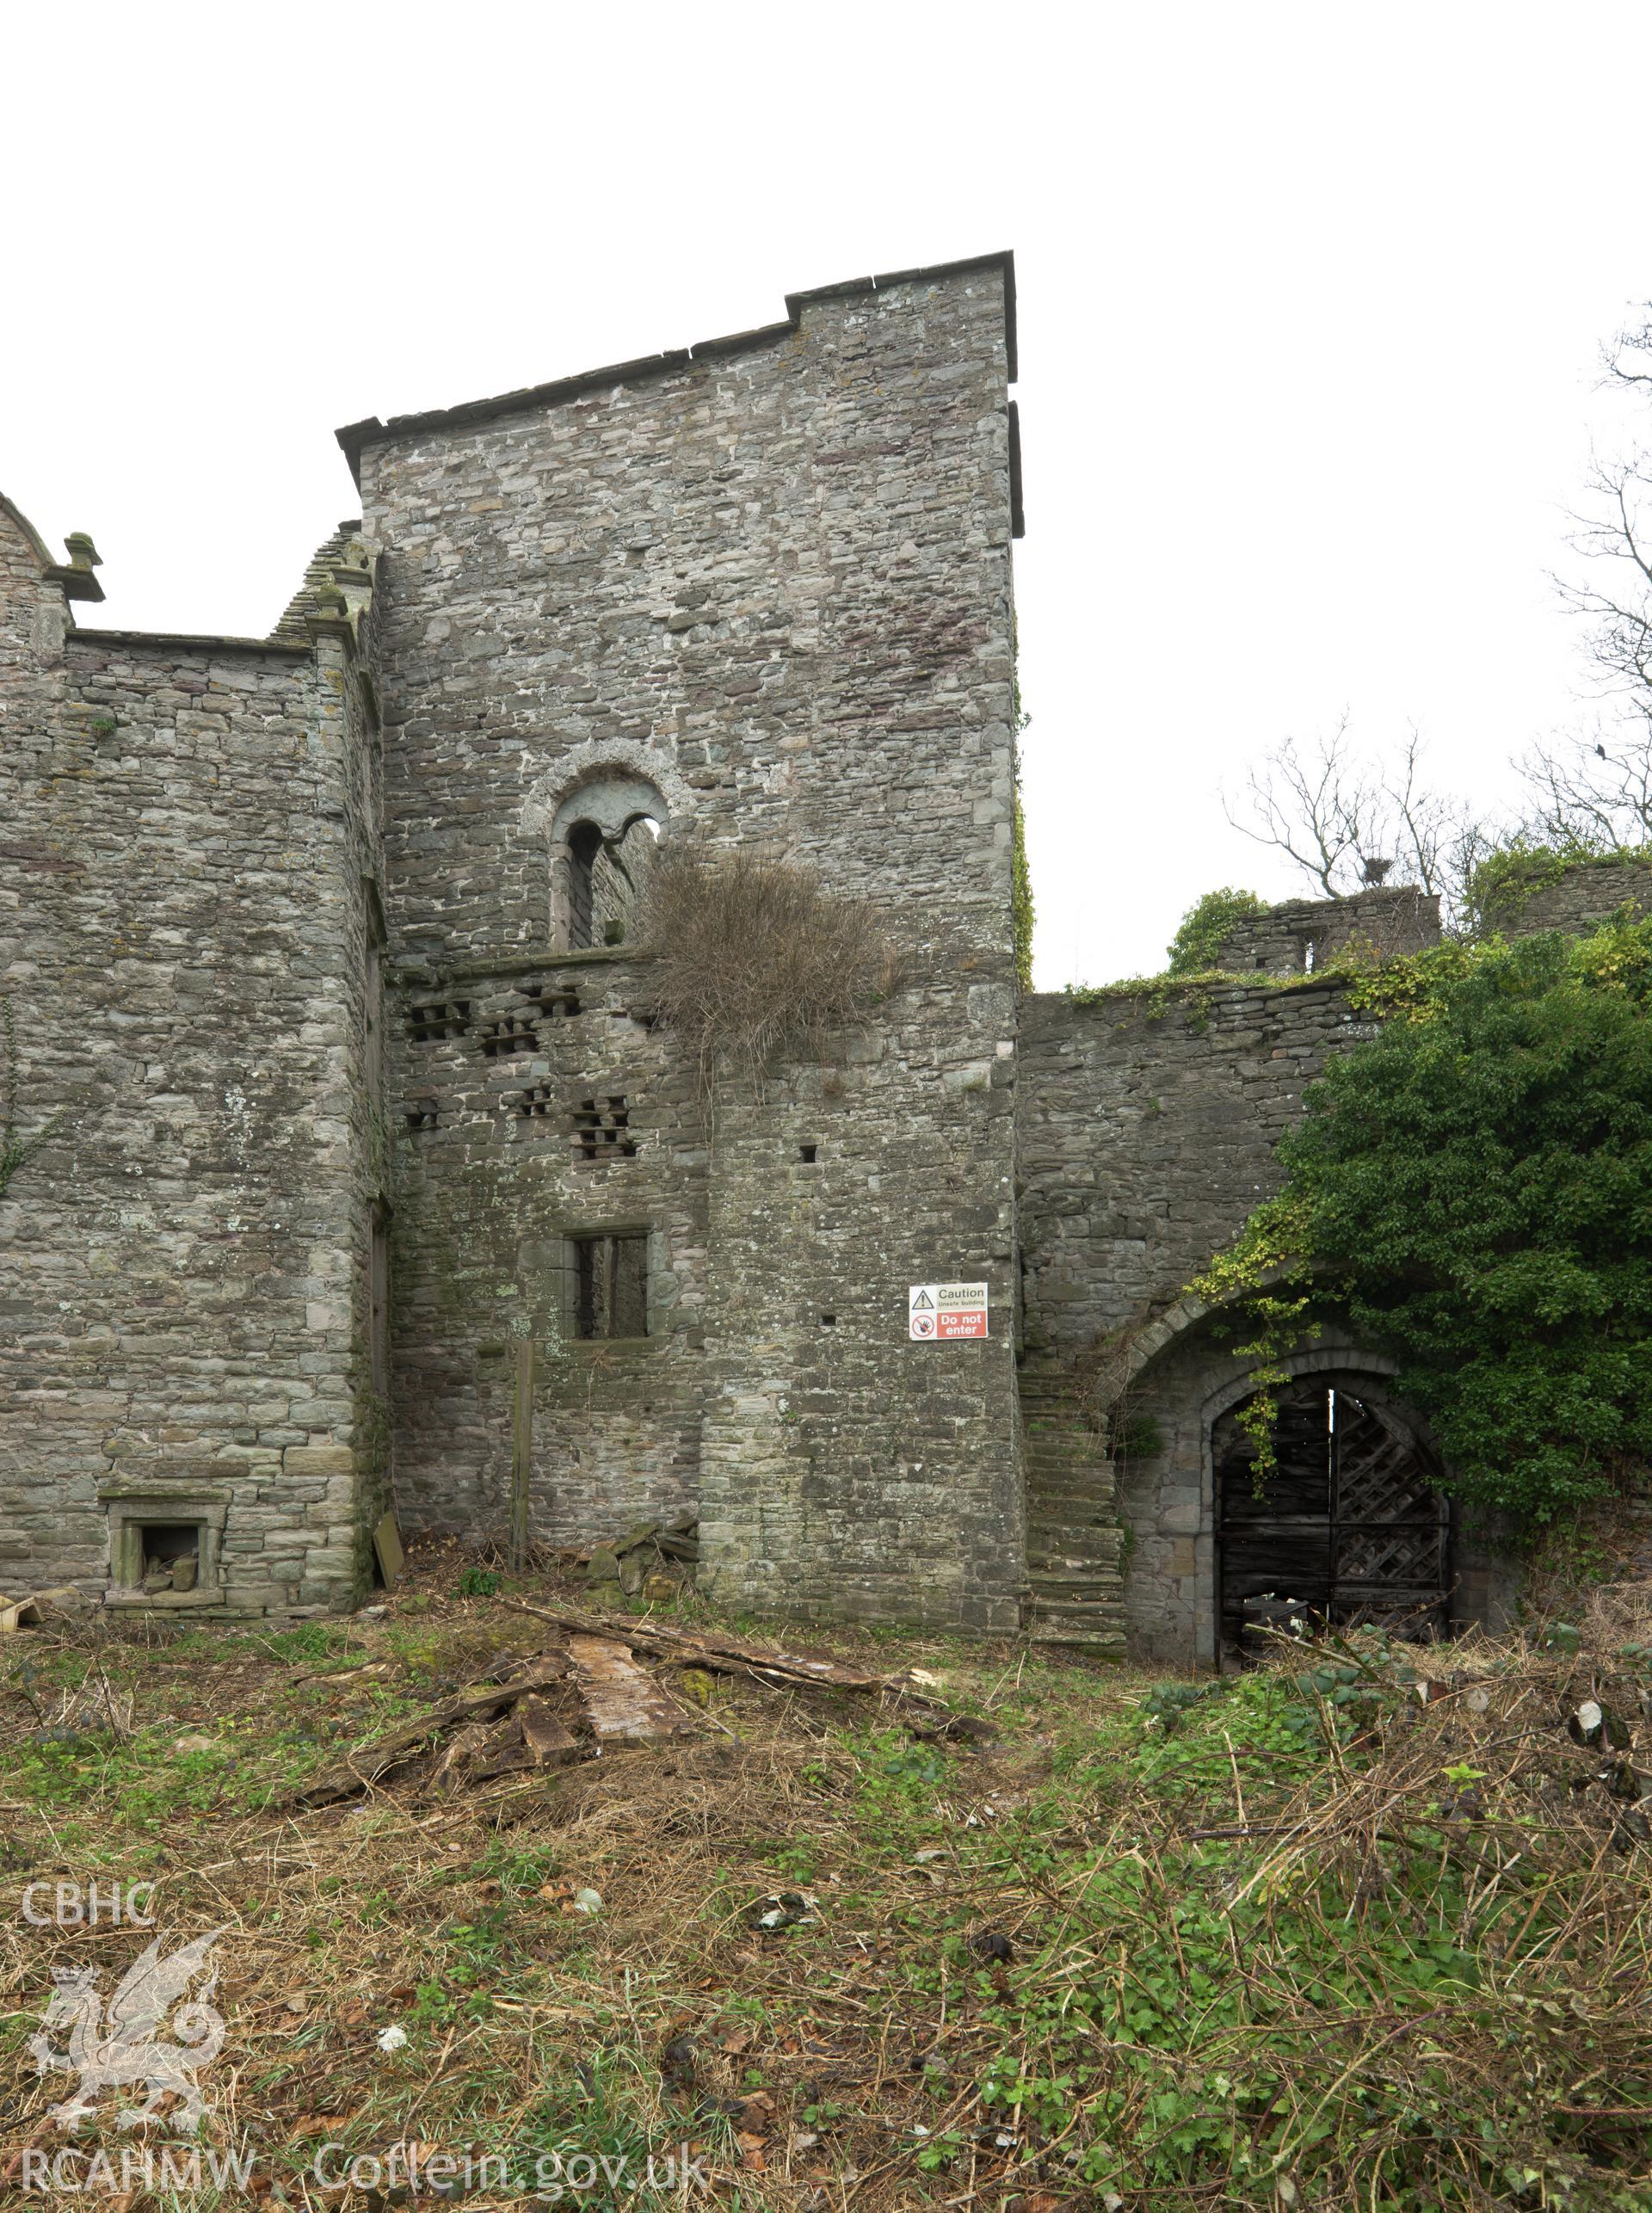 Keep and gatehouse from the south.